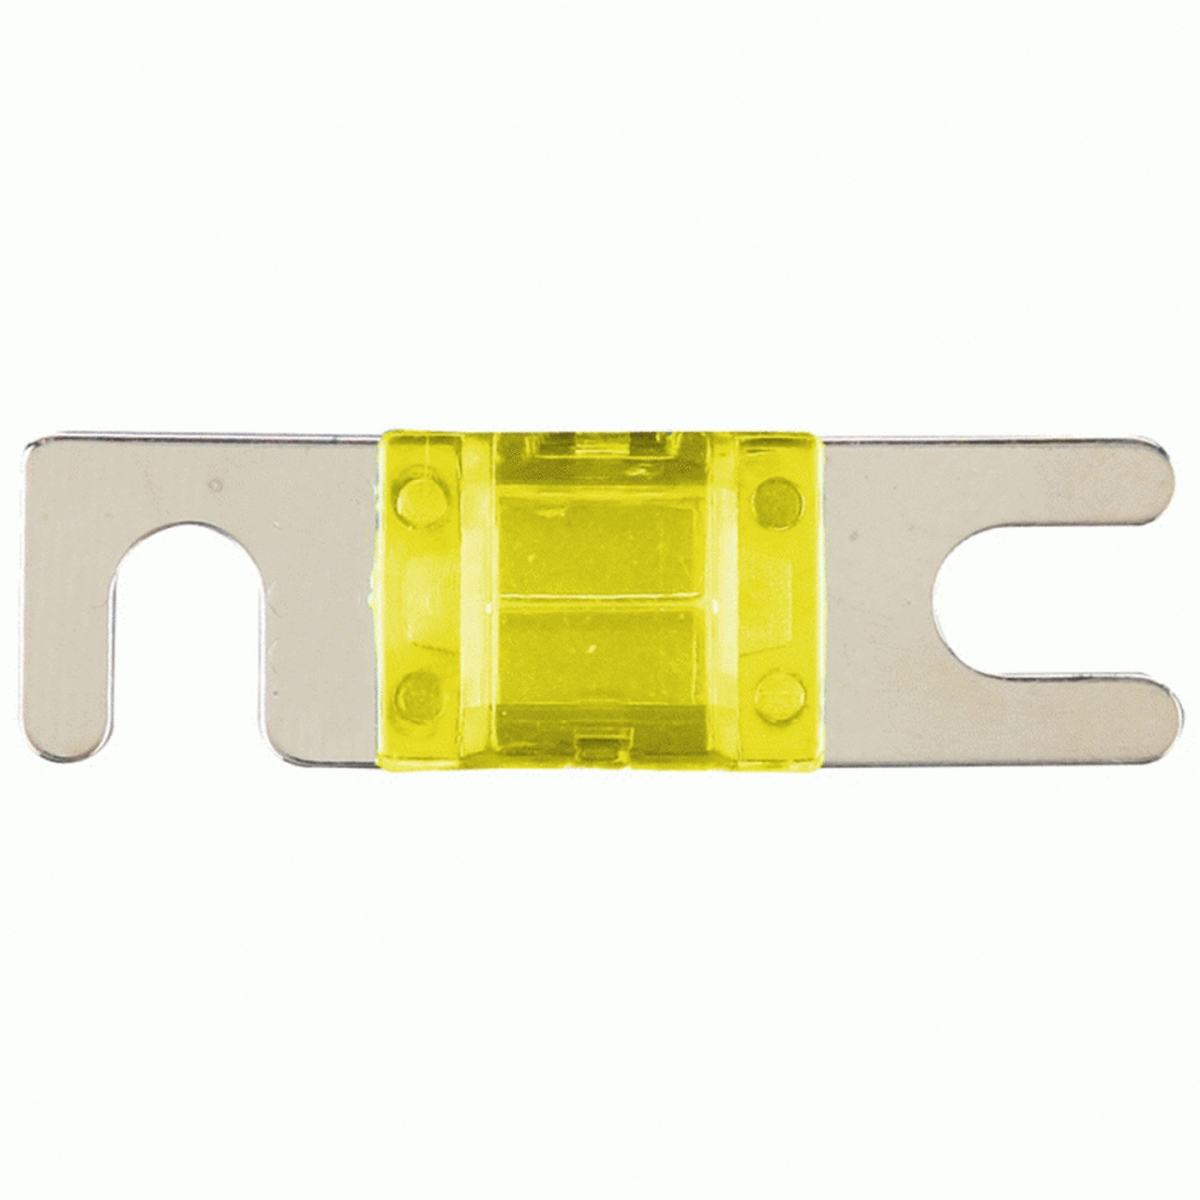 Picture of Install Bay MANL175 175A Mini ANL Fuse, Pack of 2